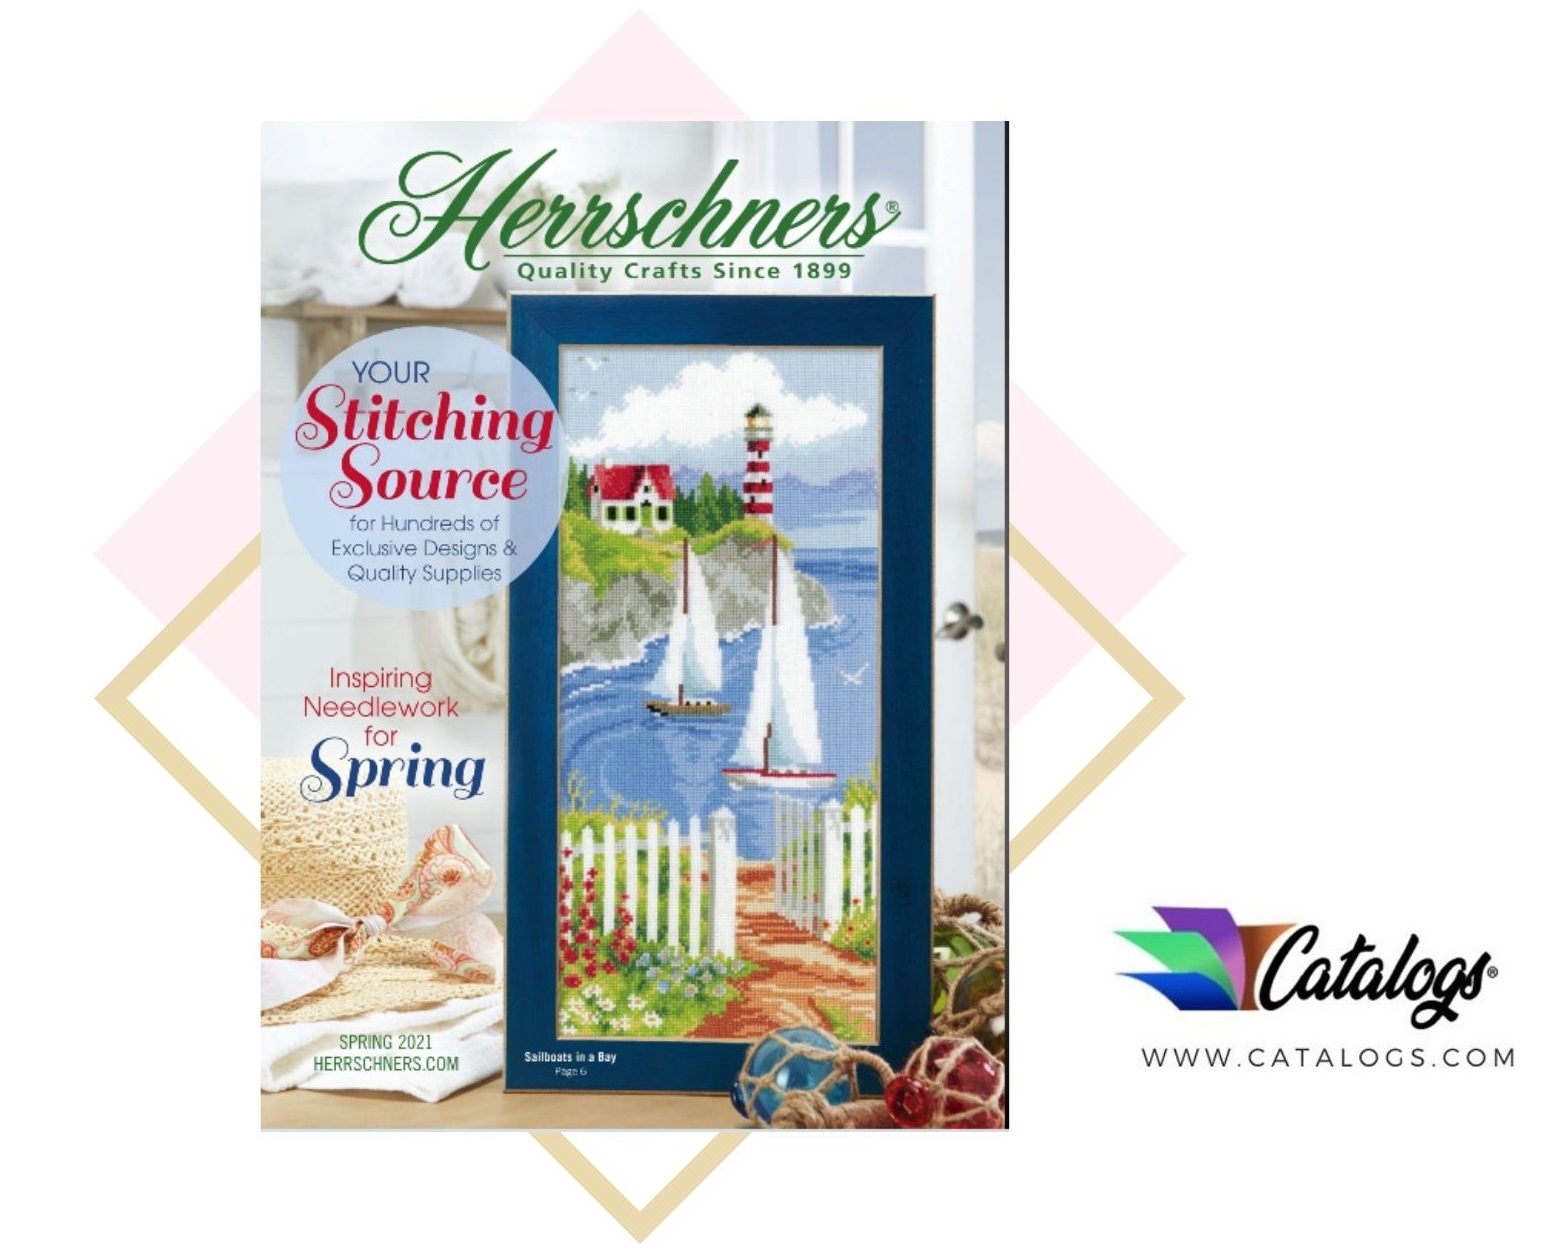 How Do I Order Free Herrschners Hobbies and Crafts Catalog?